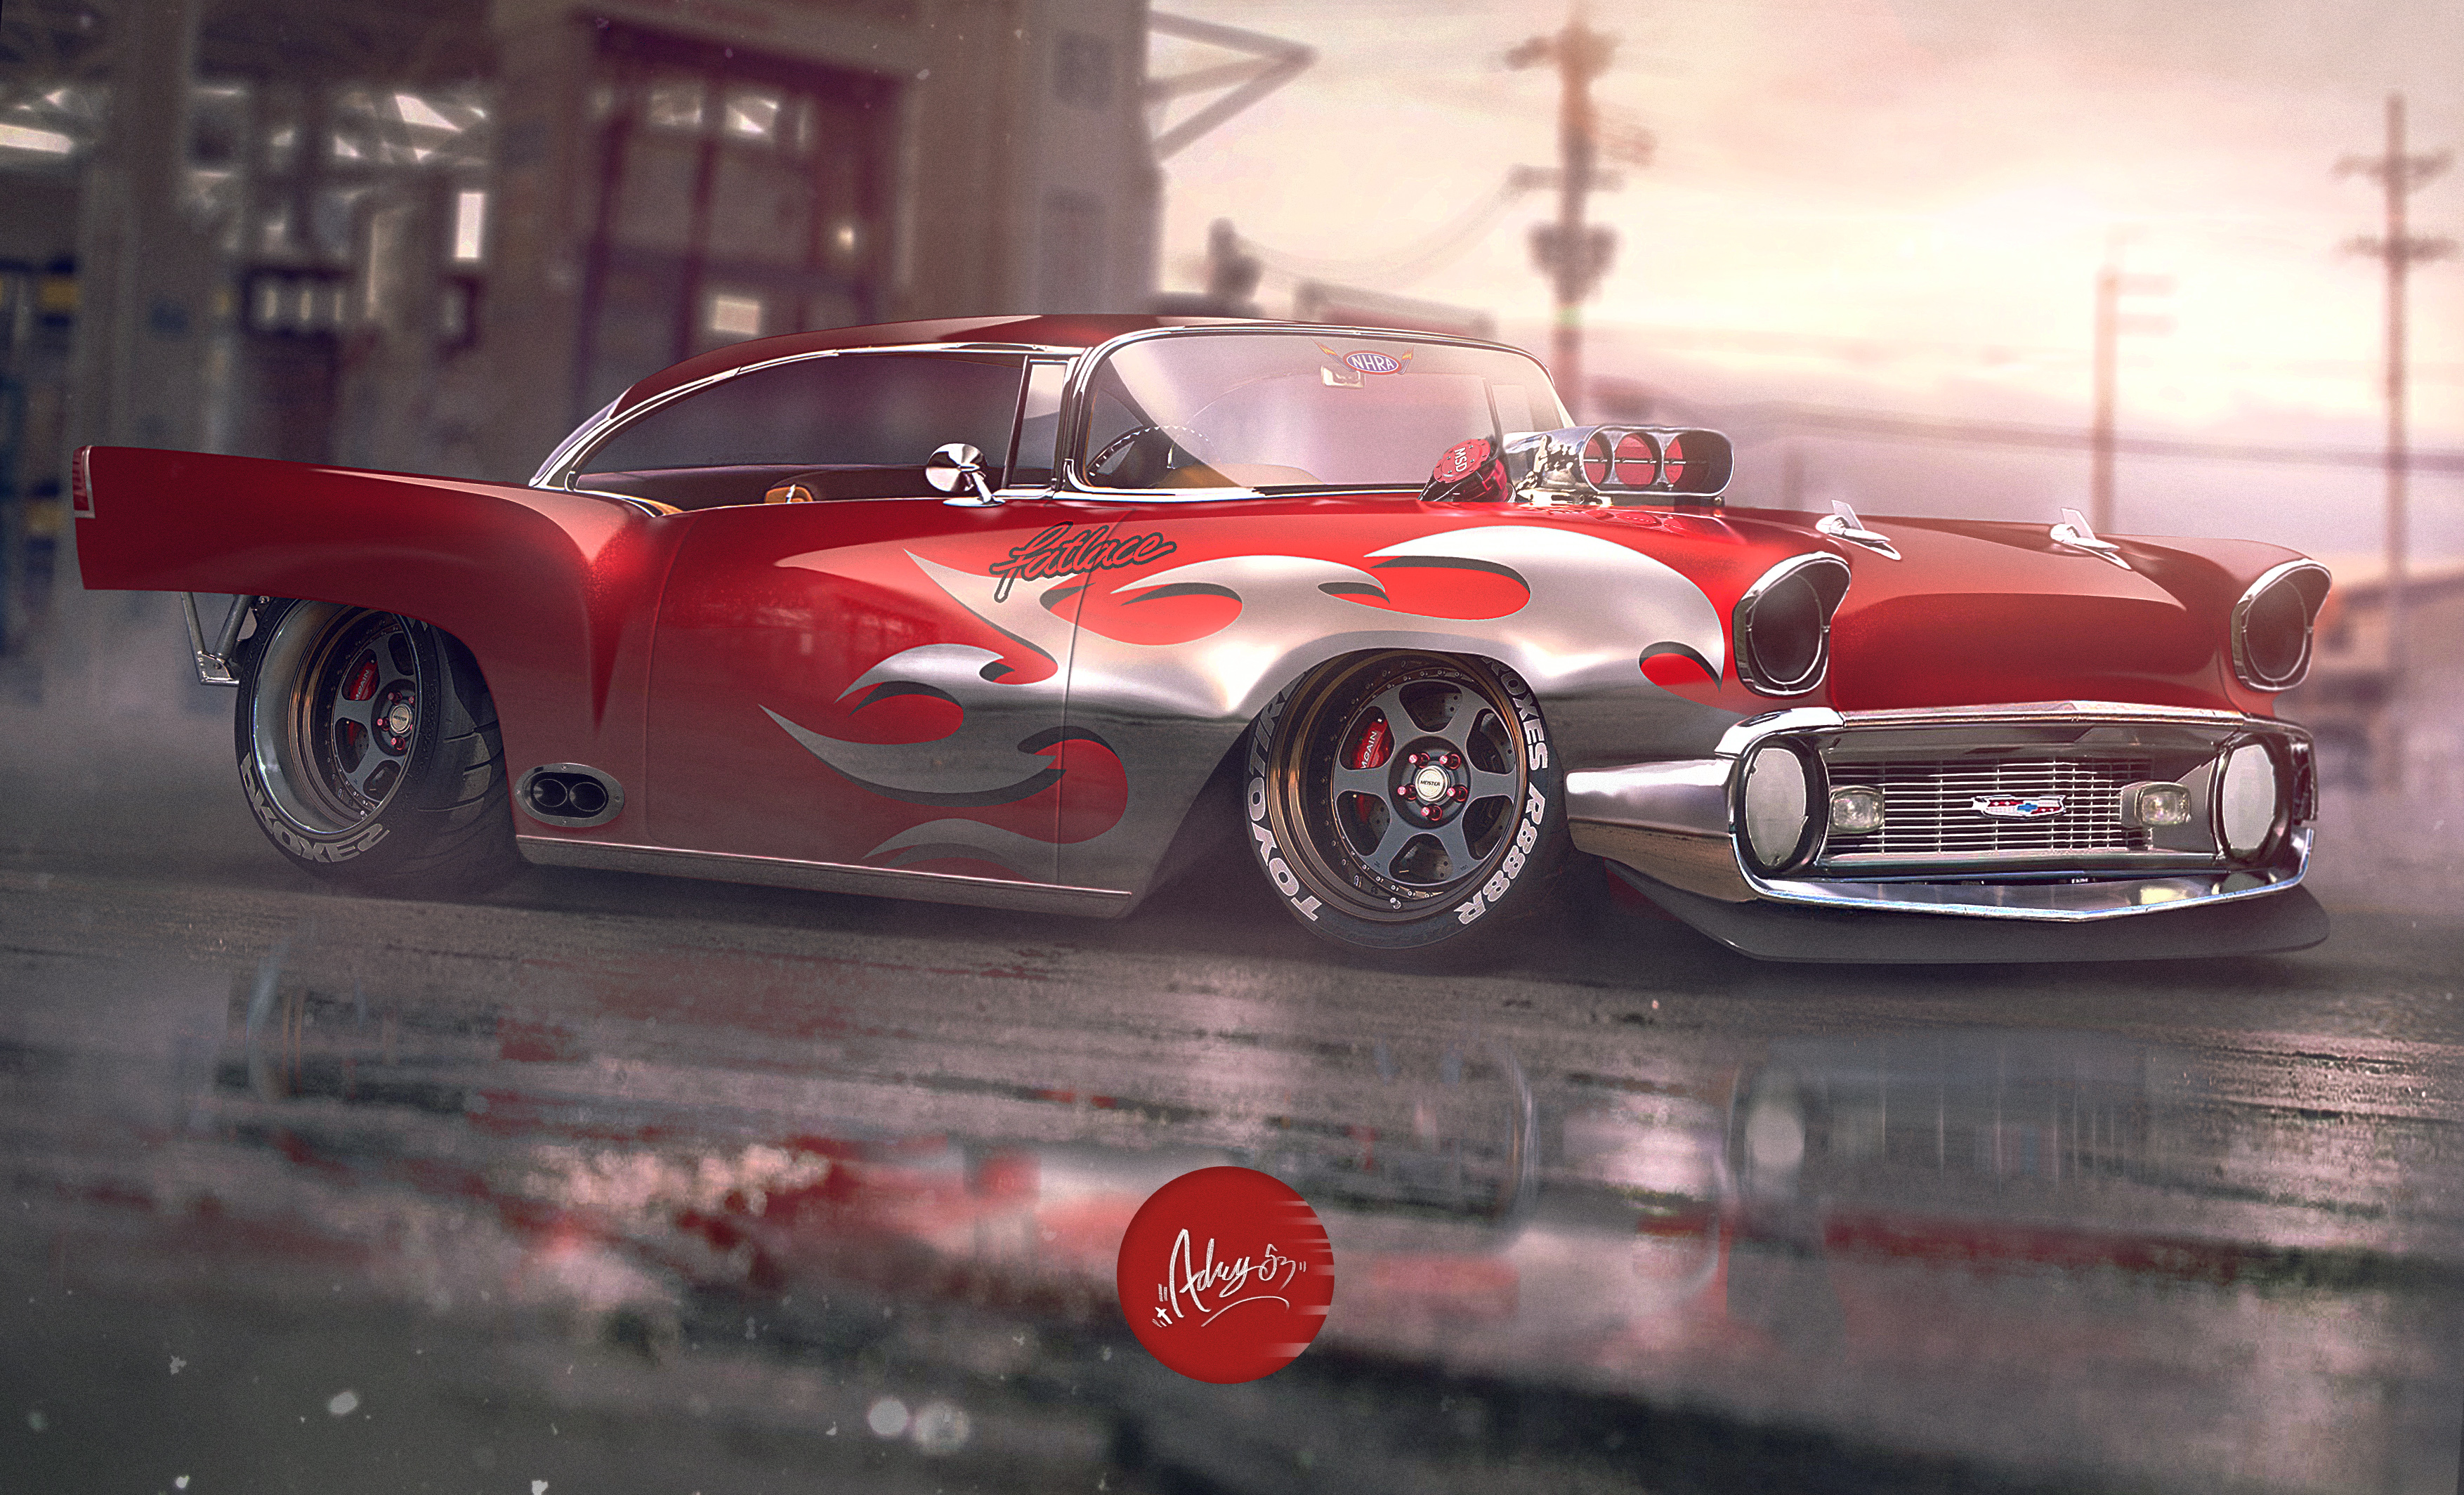 Rendering of an old red car